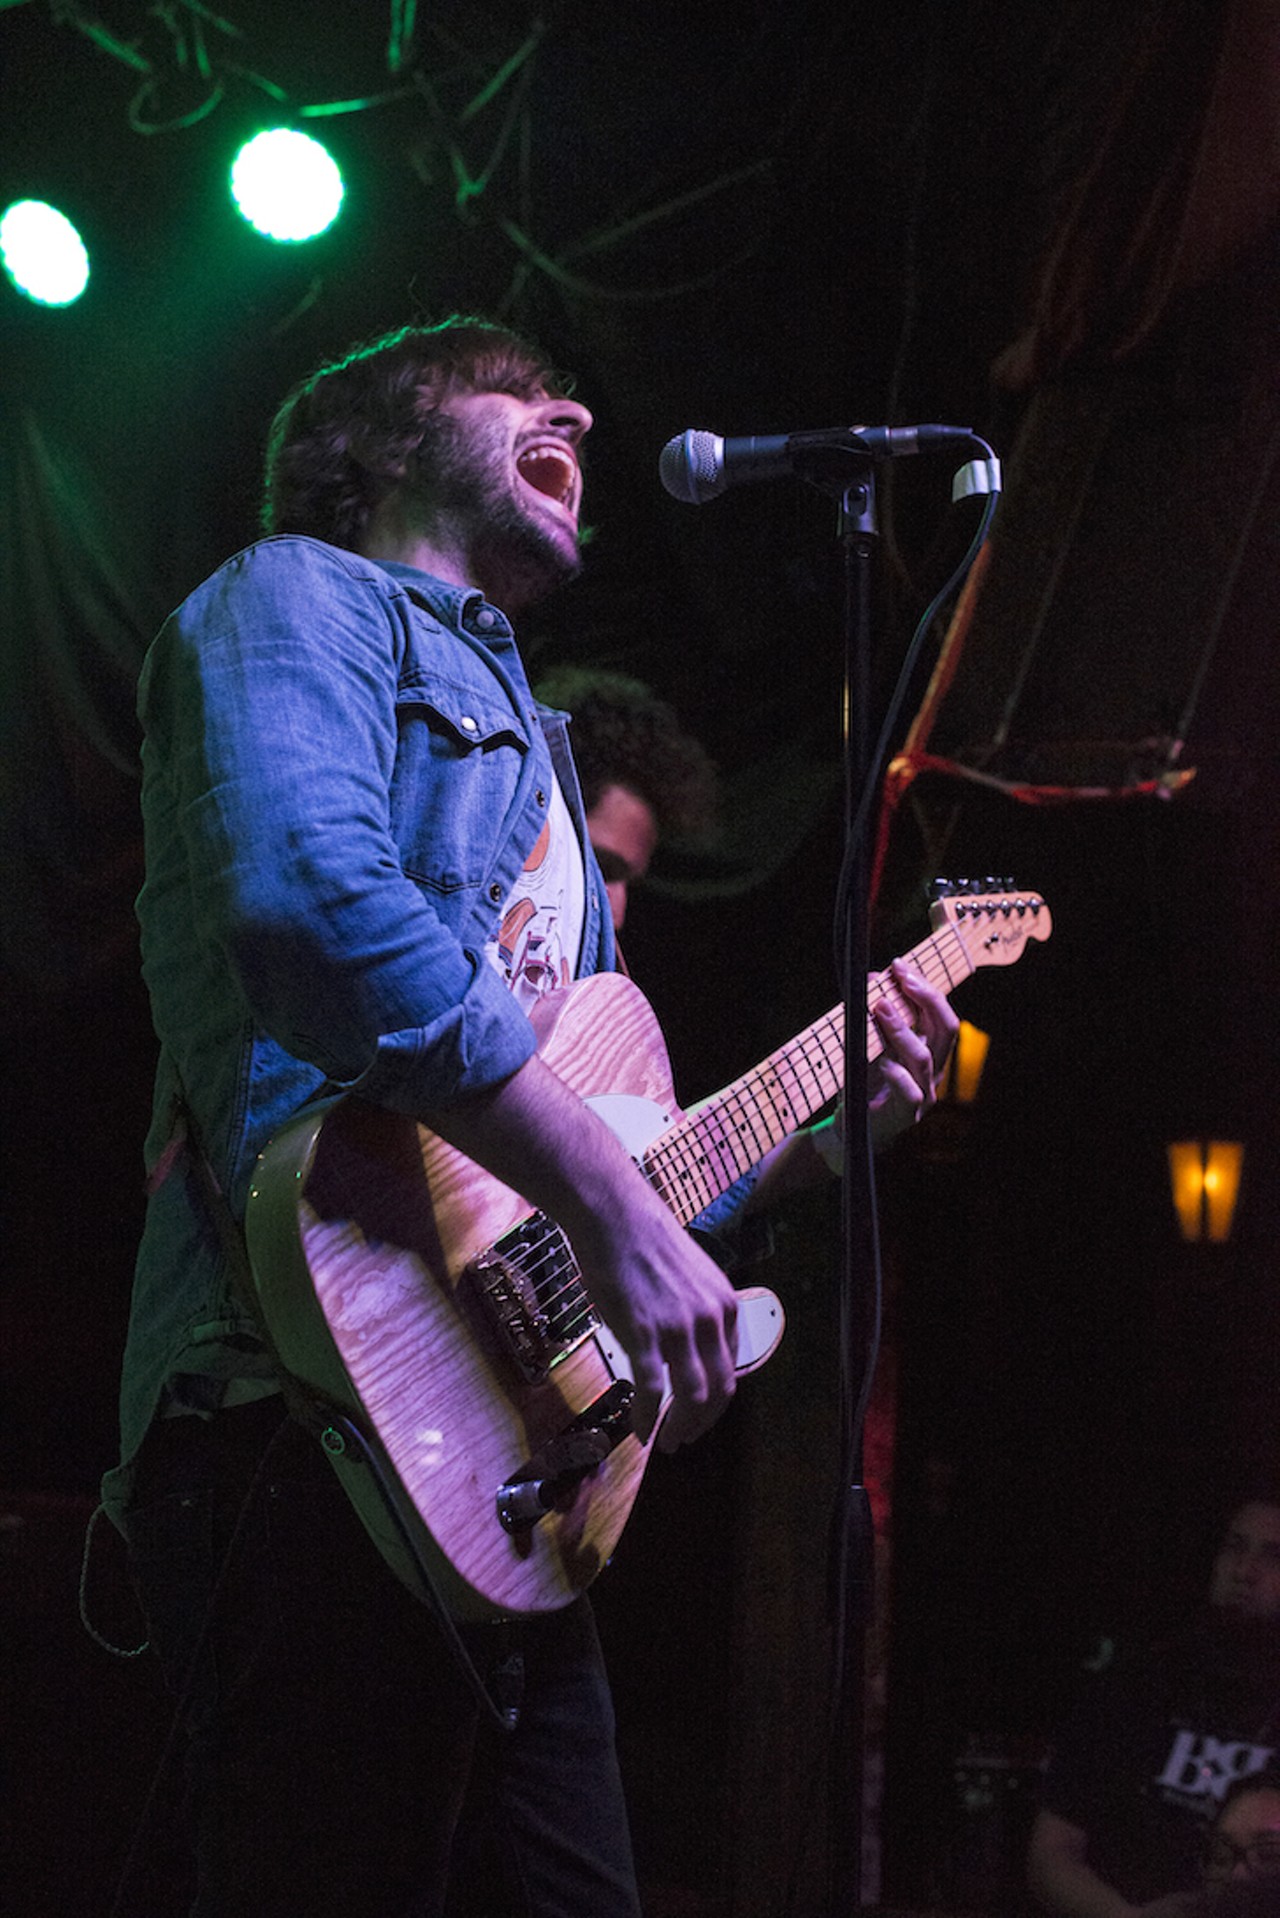 Photos from Rooney, Swimming with Bears and Royal Teeth at Backbooth